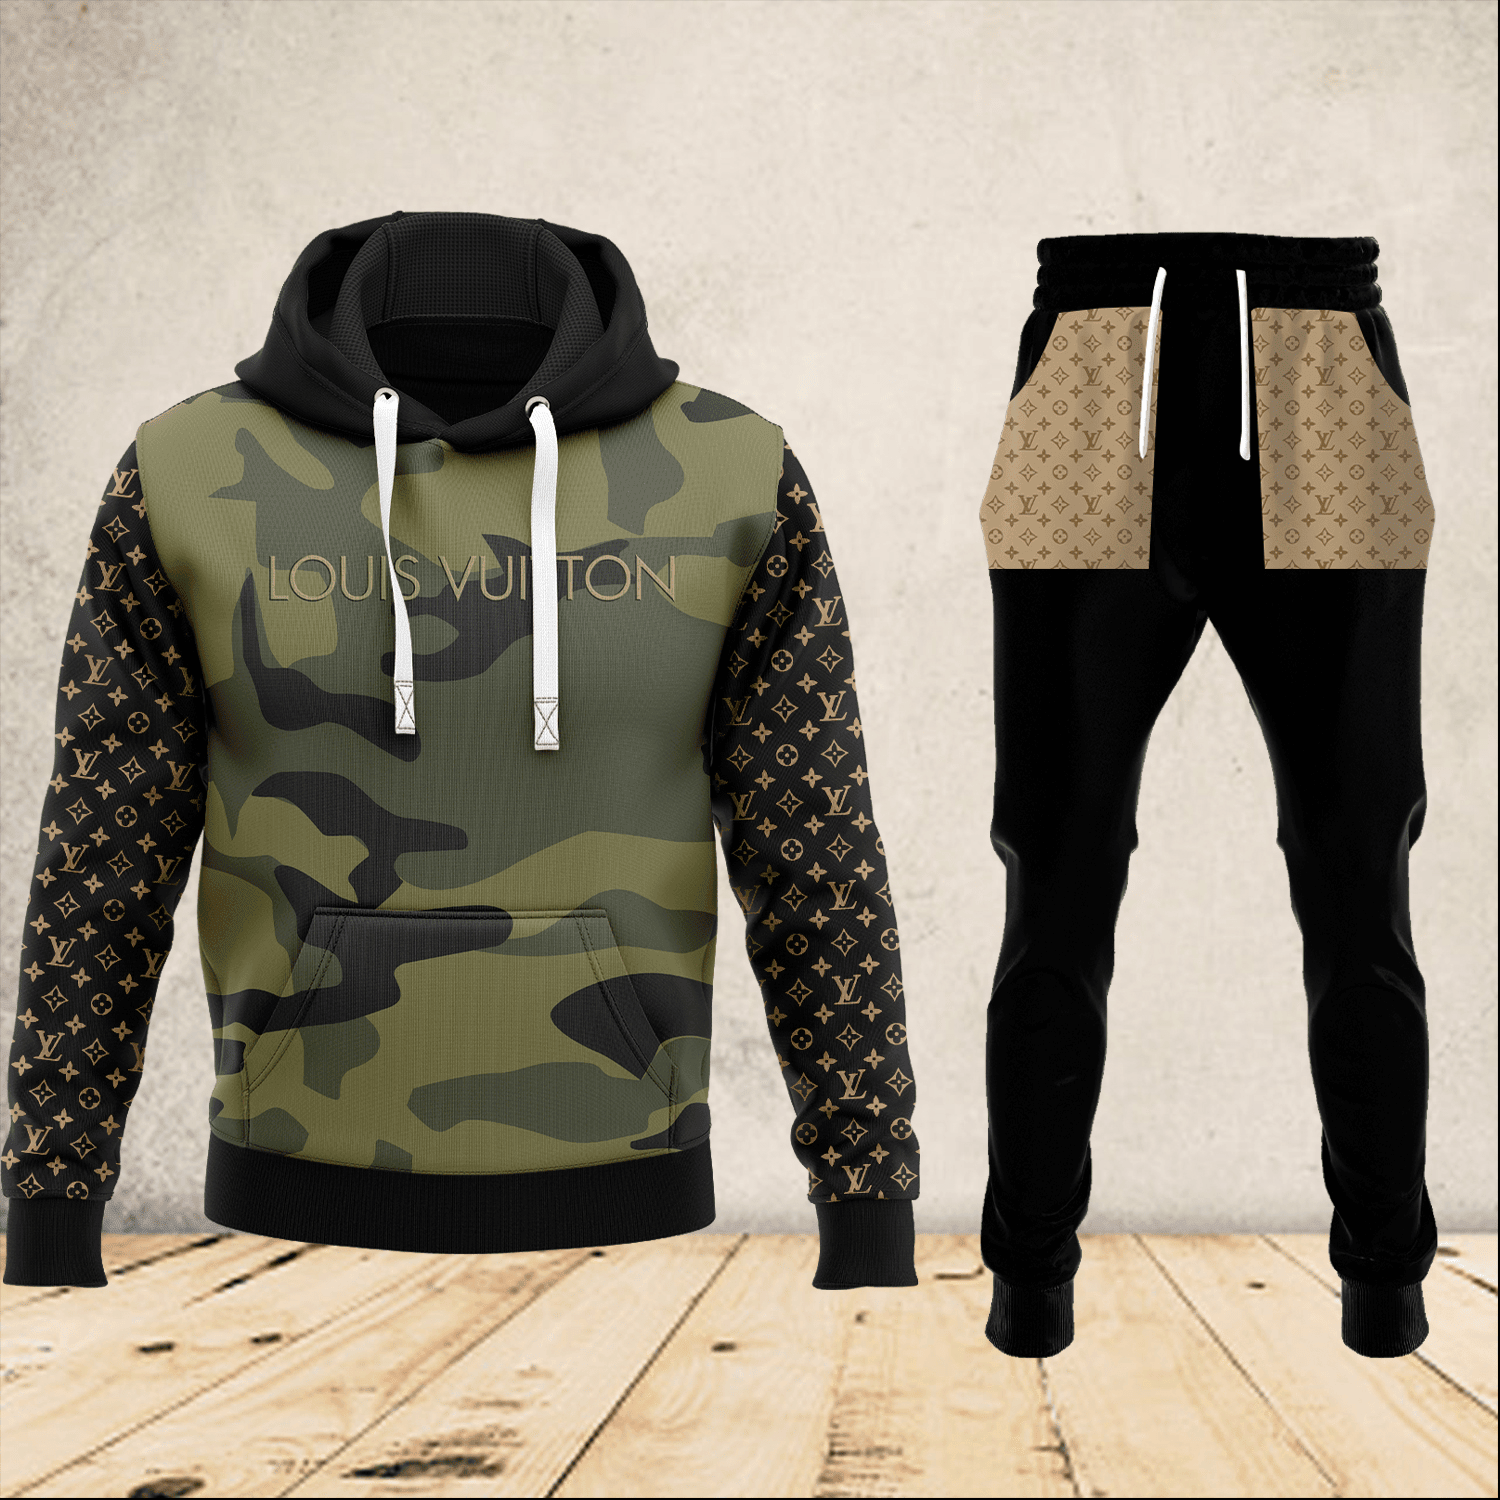 Premium Hoodie and Pants Combo Collection - Luxury Outfit